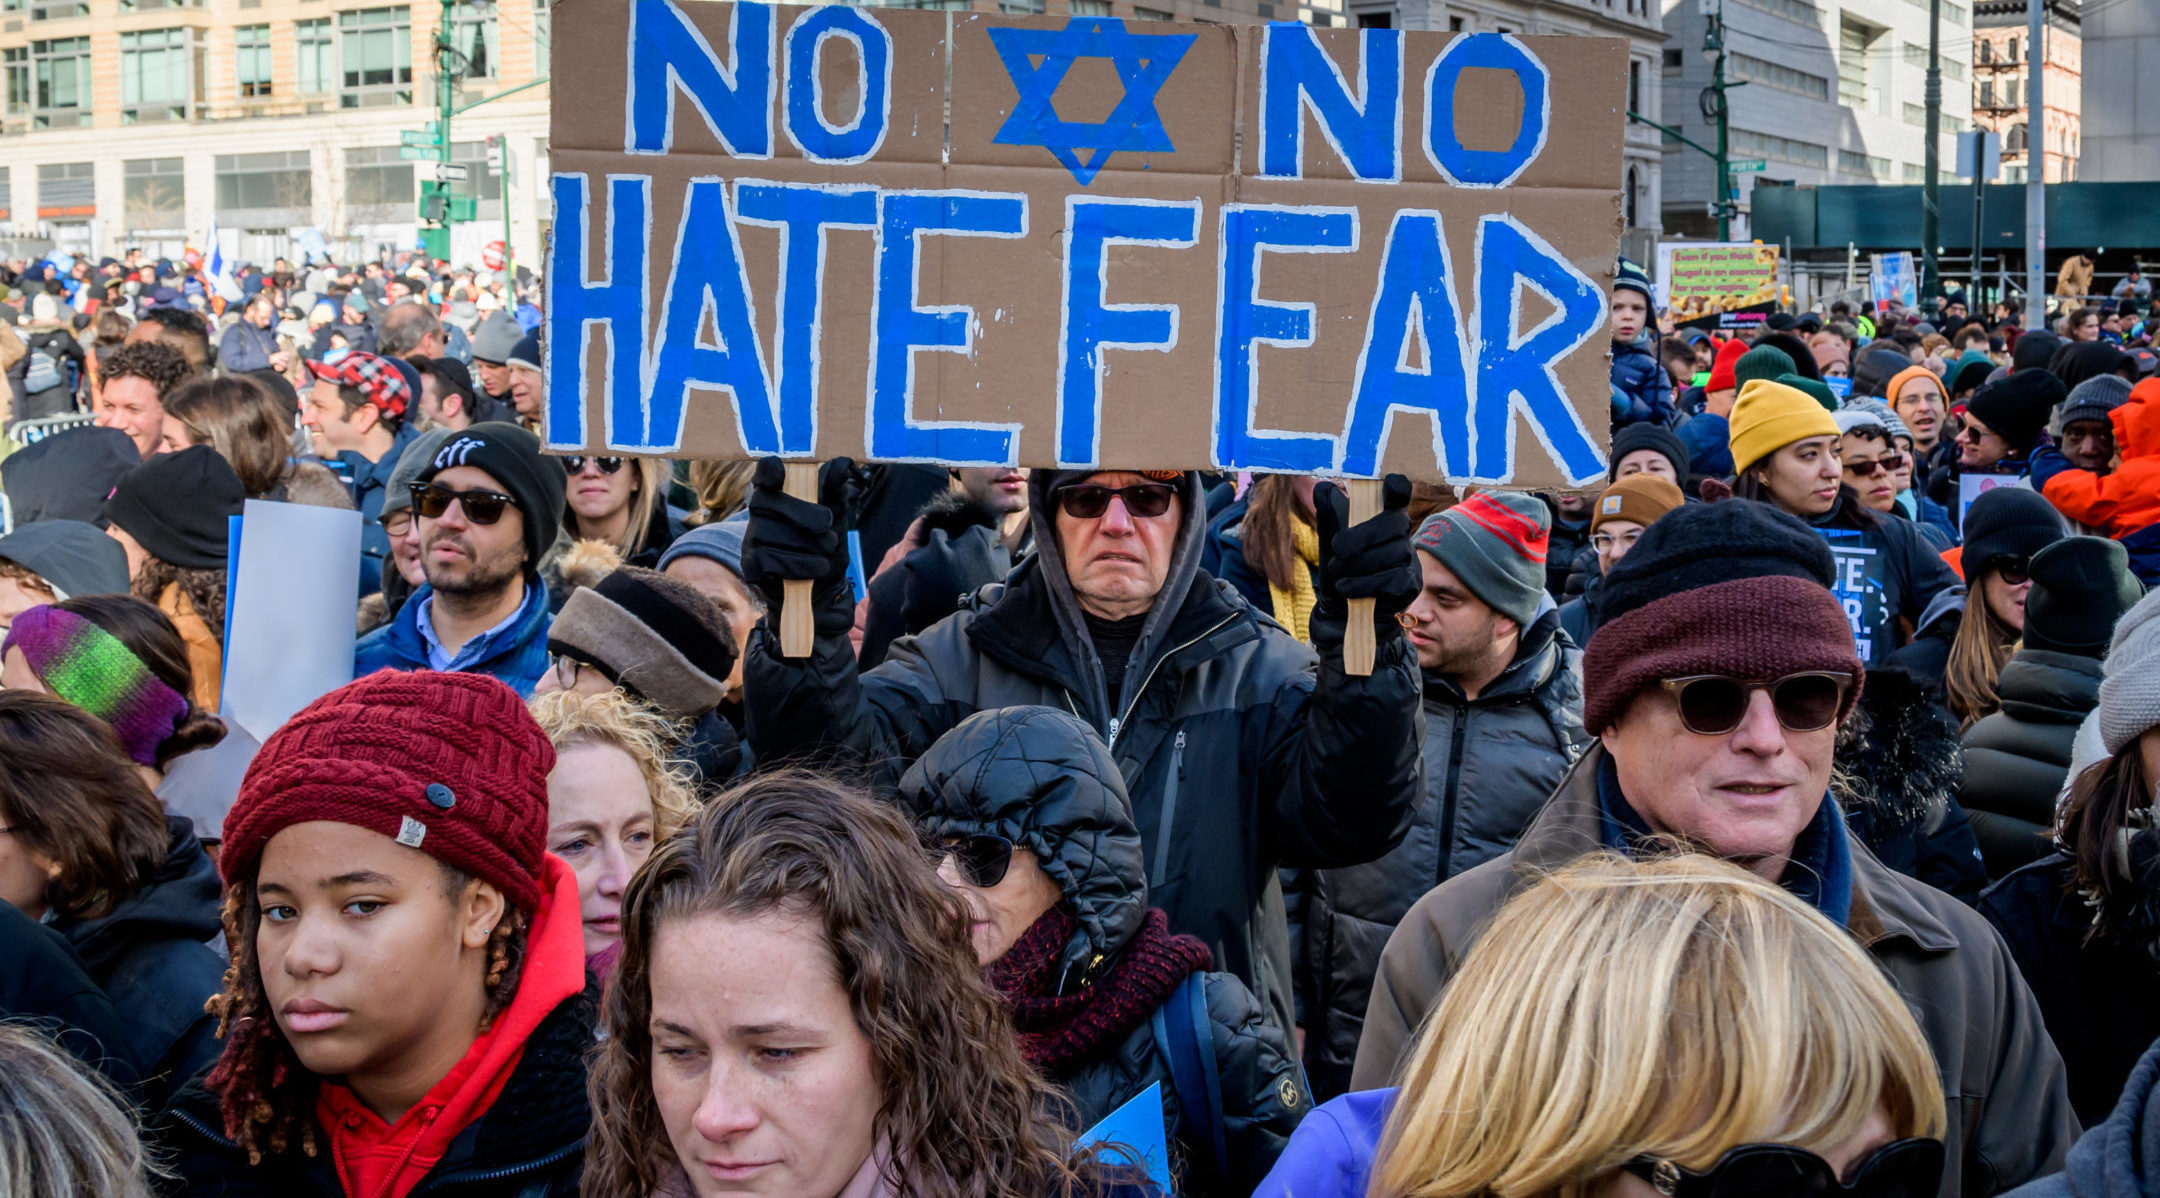 Poll Nearly 7 in 10 US Jews think Republican Party holds antisemitic